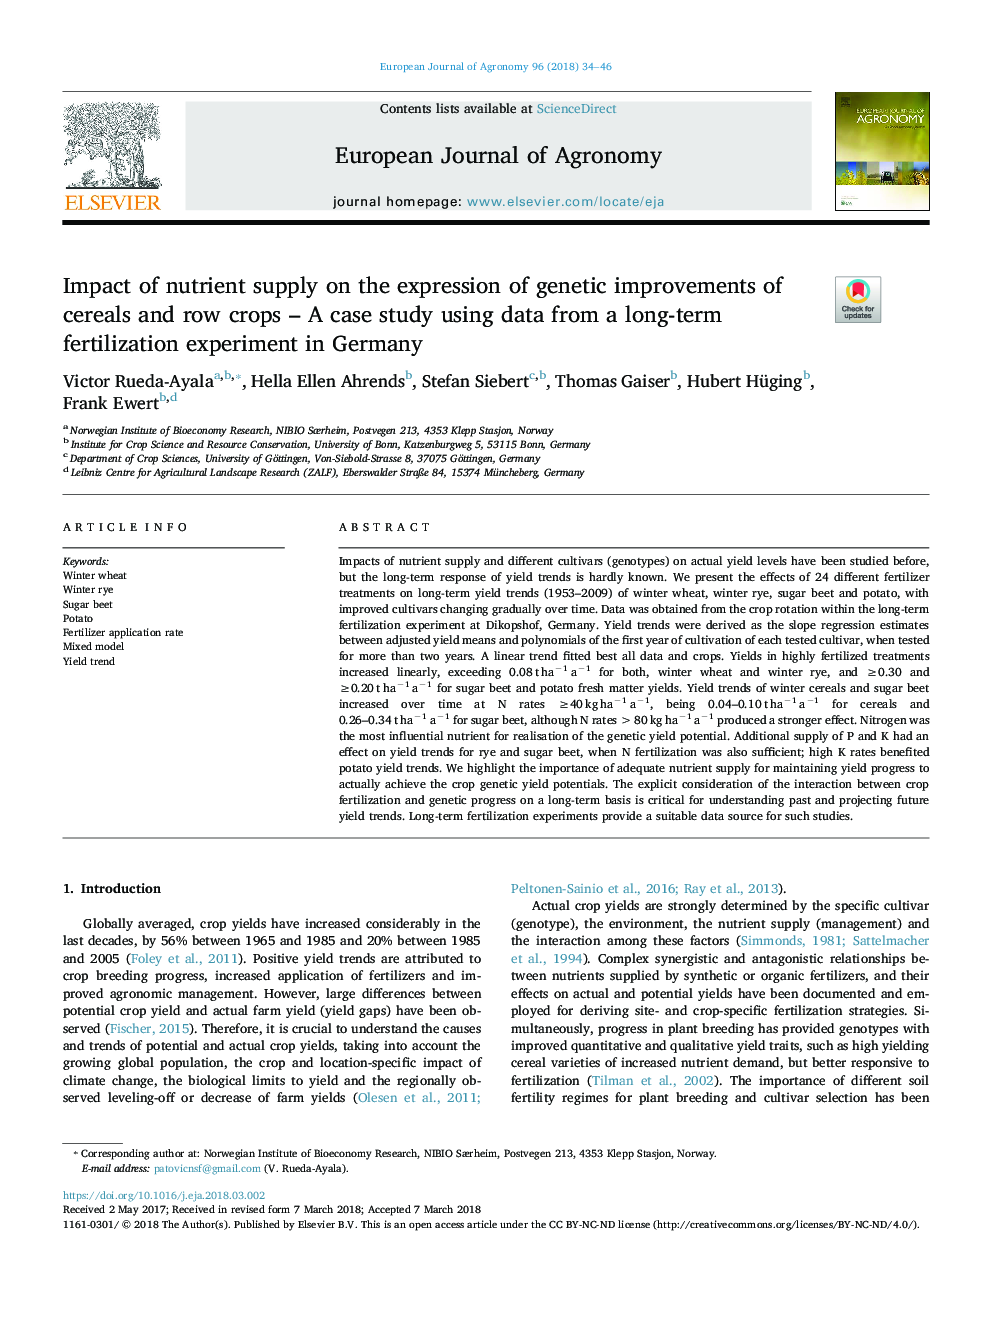 Impact of nutrient supply on the expression of genetic improvements of cereals and row crops - A case study using data from a long-term fertilization experiment in Germany